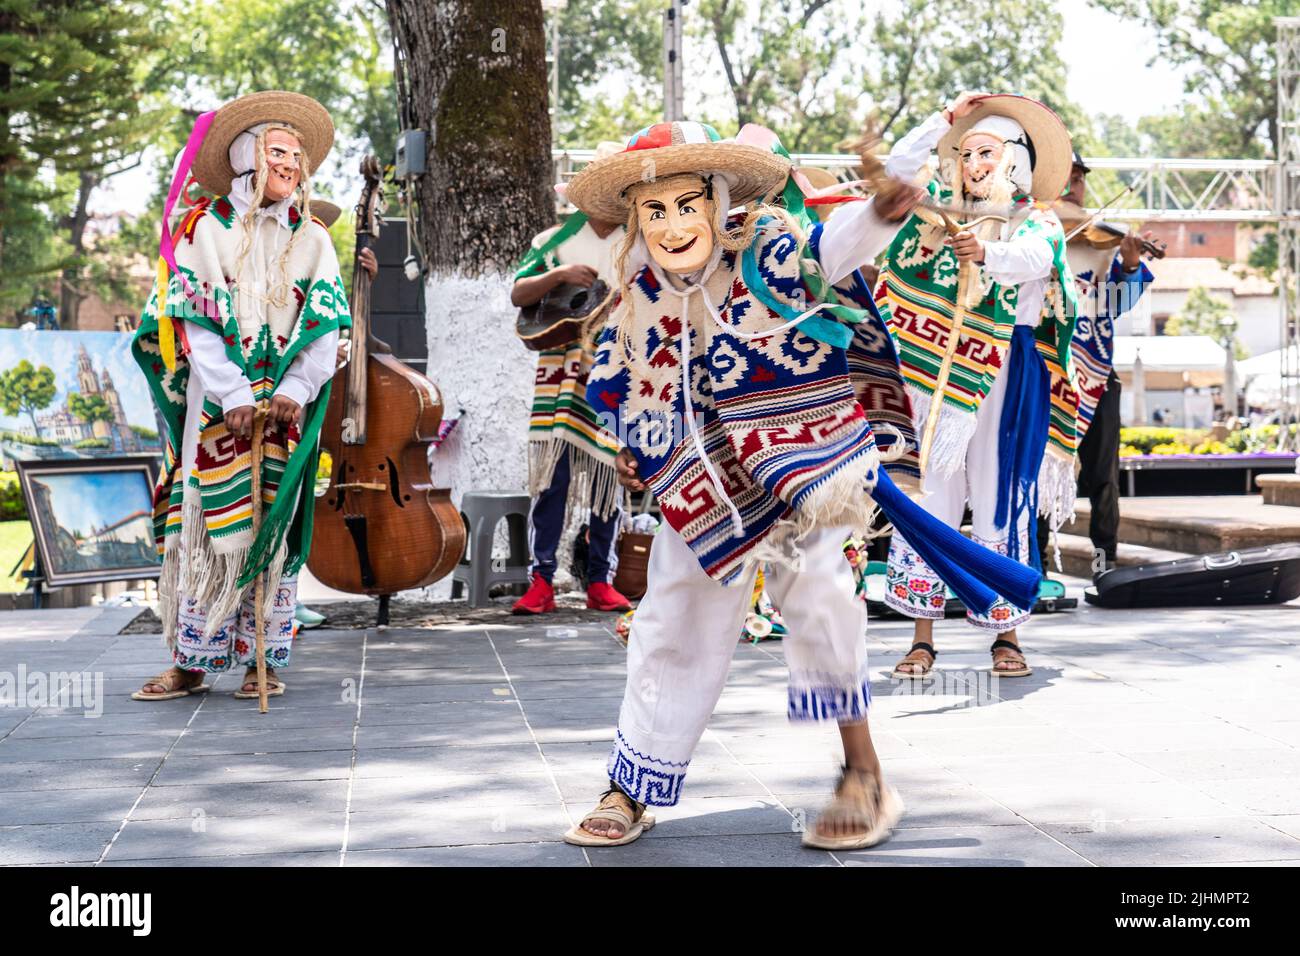 Young Mexican boys, dressed in the traditional old man costume, perform the traditional Danza de los Viejitos at the Plaza Vasco de Quiroga town square, April 11, 2022 in Patzcuaro, Michoacan, Mexico. Stock Photo